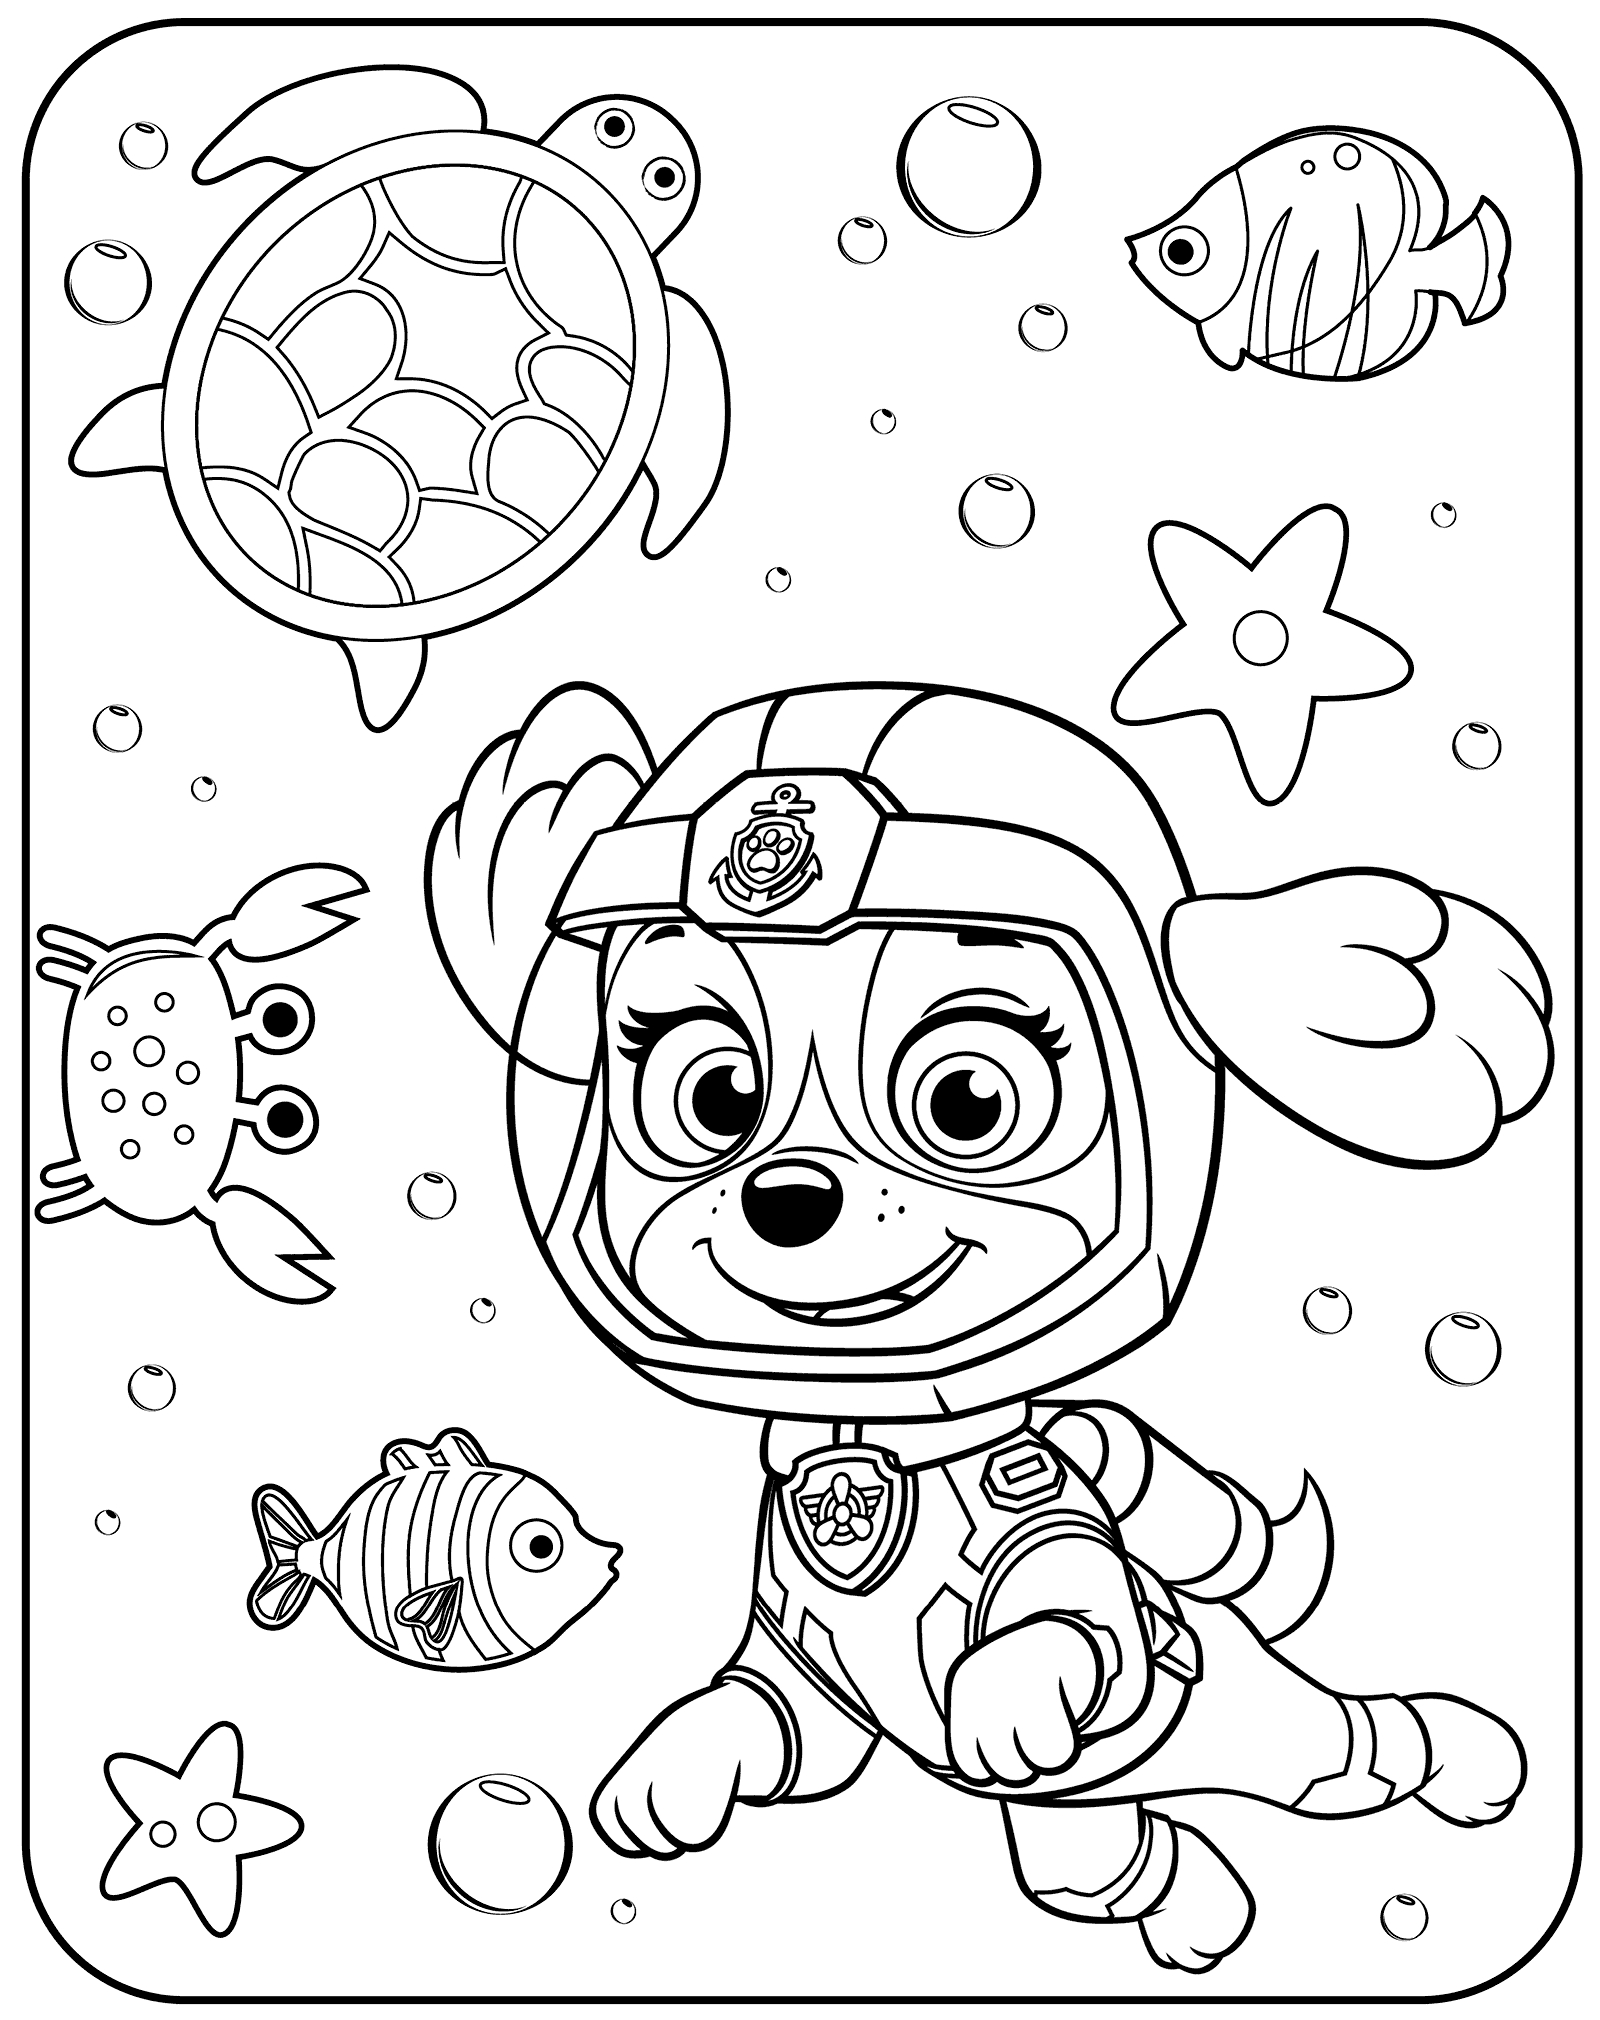 Paw Patrol Characters Coloring Pages at GetColorings.com ...